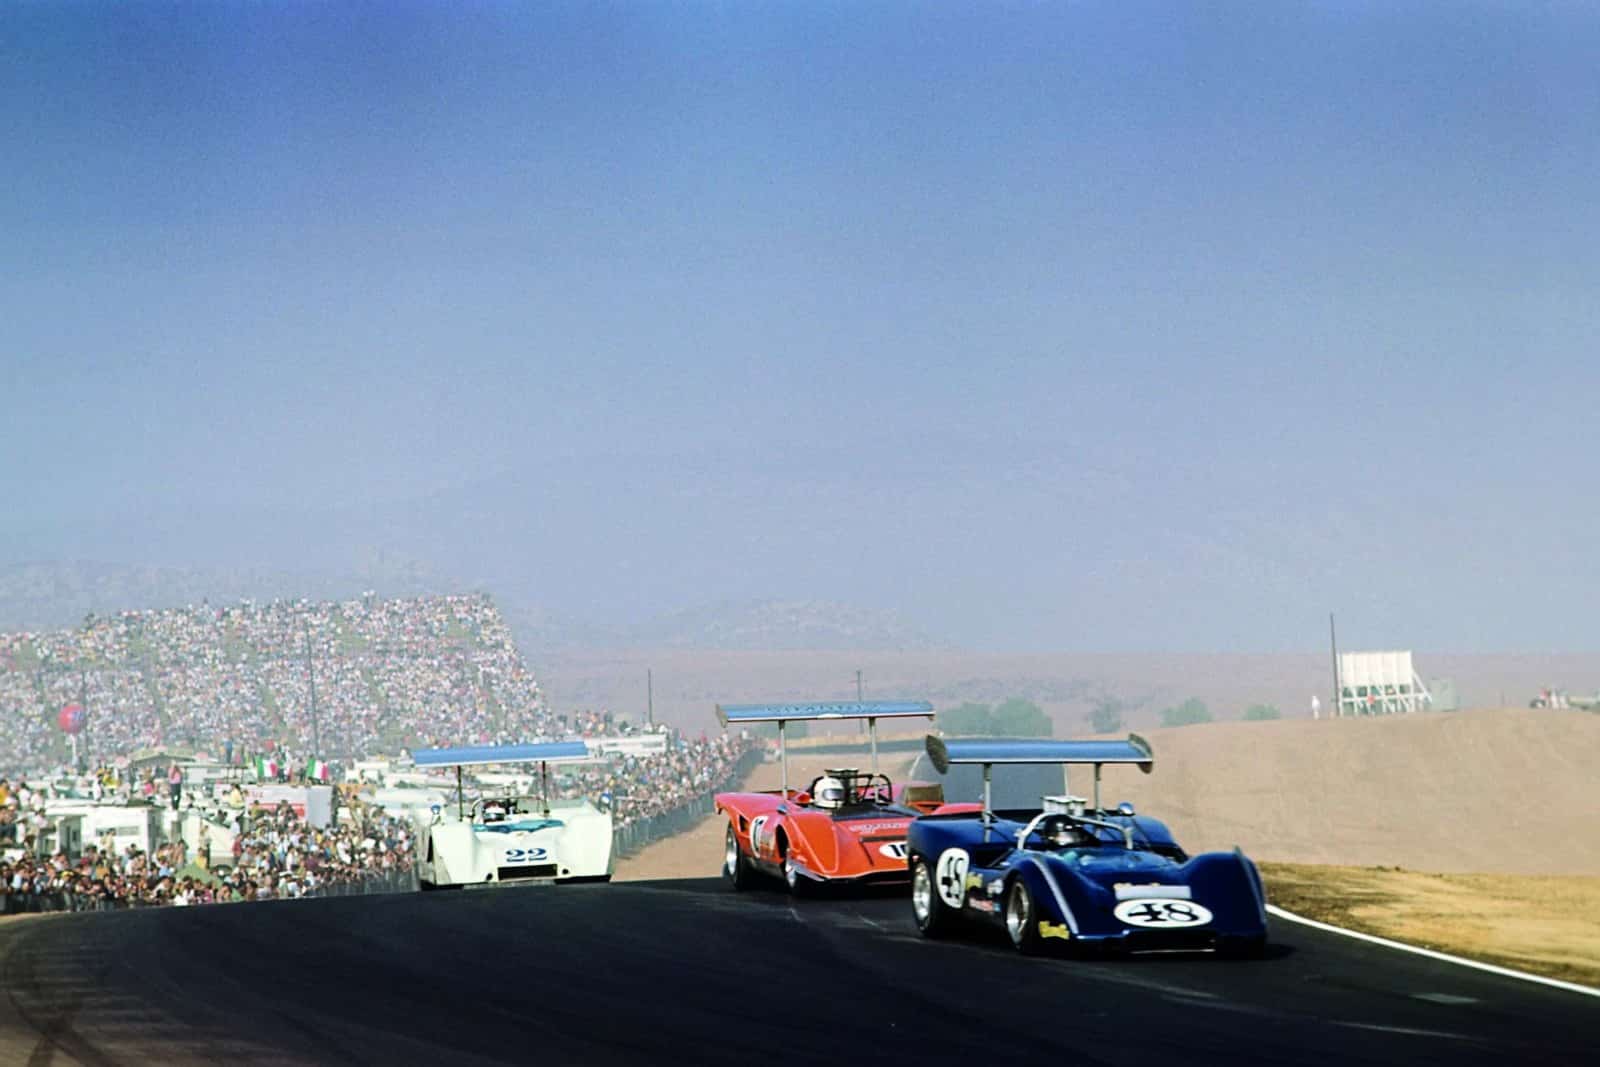 Dan-Gurney-Chuck-Parsons-and-Jackie-Oliver-at-1969-Riverside-Can-Am-race